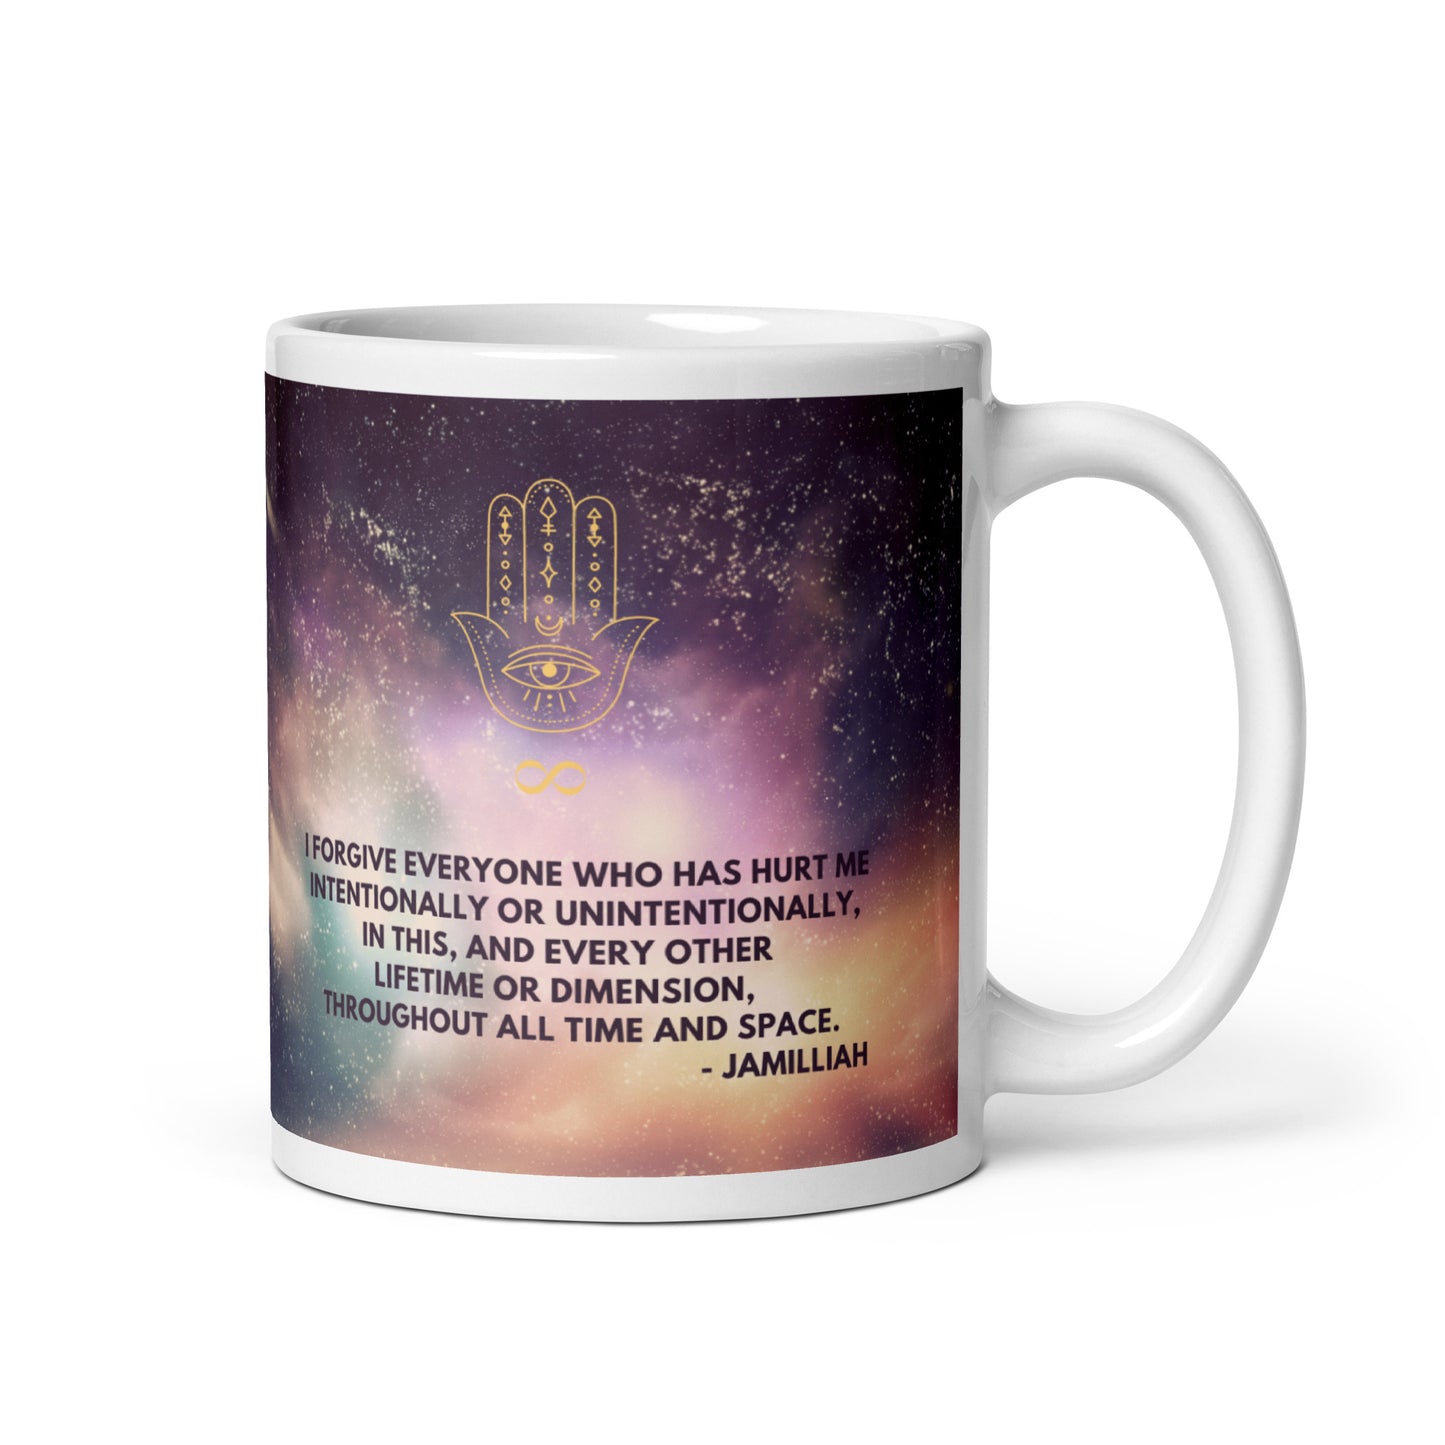 White, purple, green, and yellow cosmos/universe/galaxy/space design. Glossy 11oz mug with original logo and quote, right side handle. Spiritual hamsa hand/infinity symbol brand logo. Original otherworldly, wise quote. "I Forgive Everyone Who Has Hurt Me Intentionally Or Unintentionally, In This, And Every Other Lifetime Or Dimension, Throughout All Time And Space." - Jamilliah - JAMILLIAH'S WISDOM IS TIMELESS SHOP - wisdomistimeless.com.